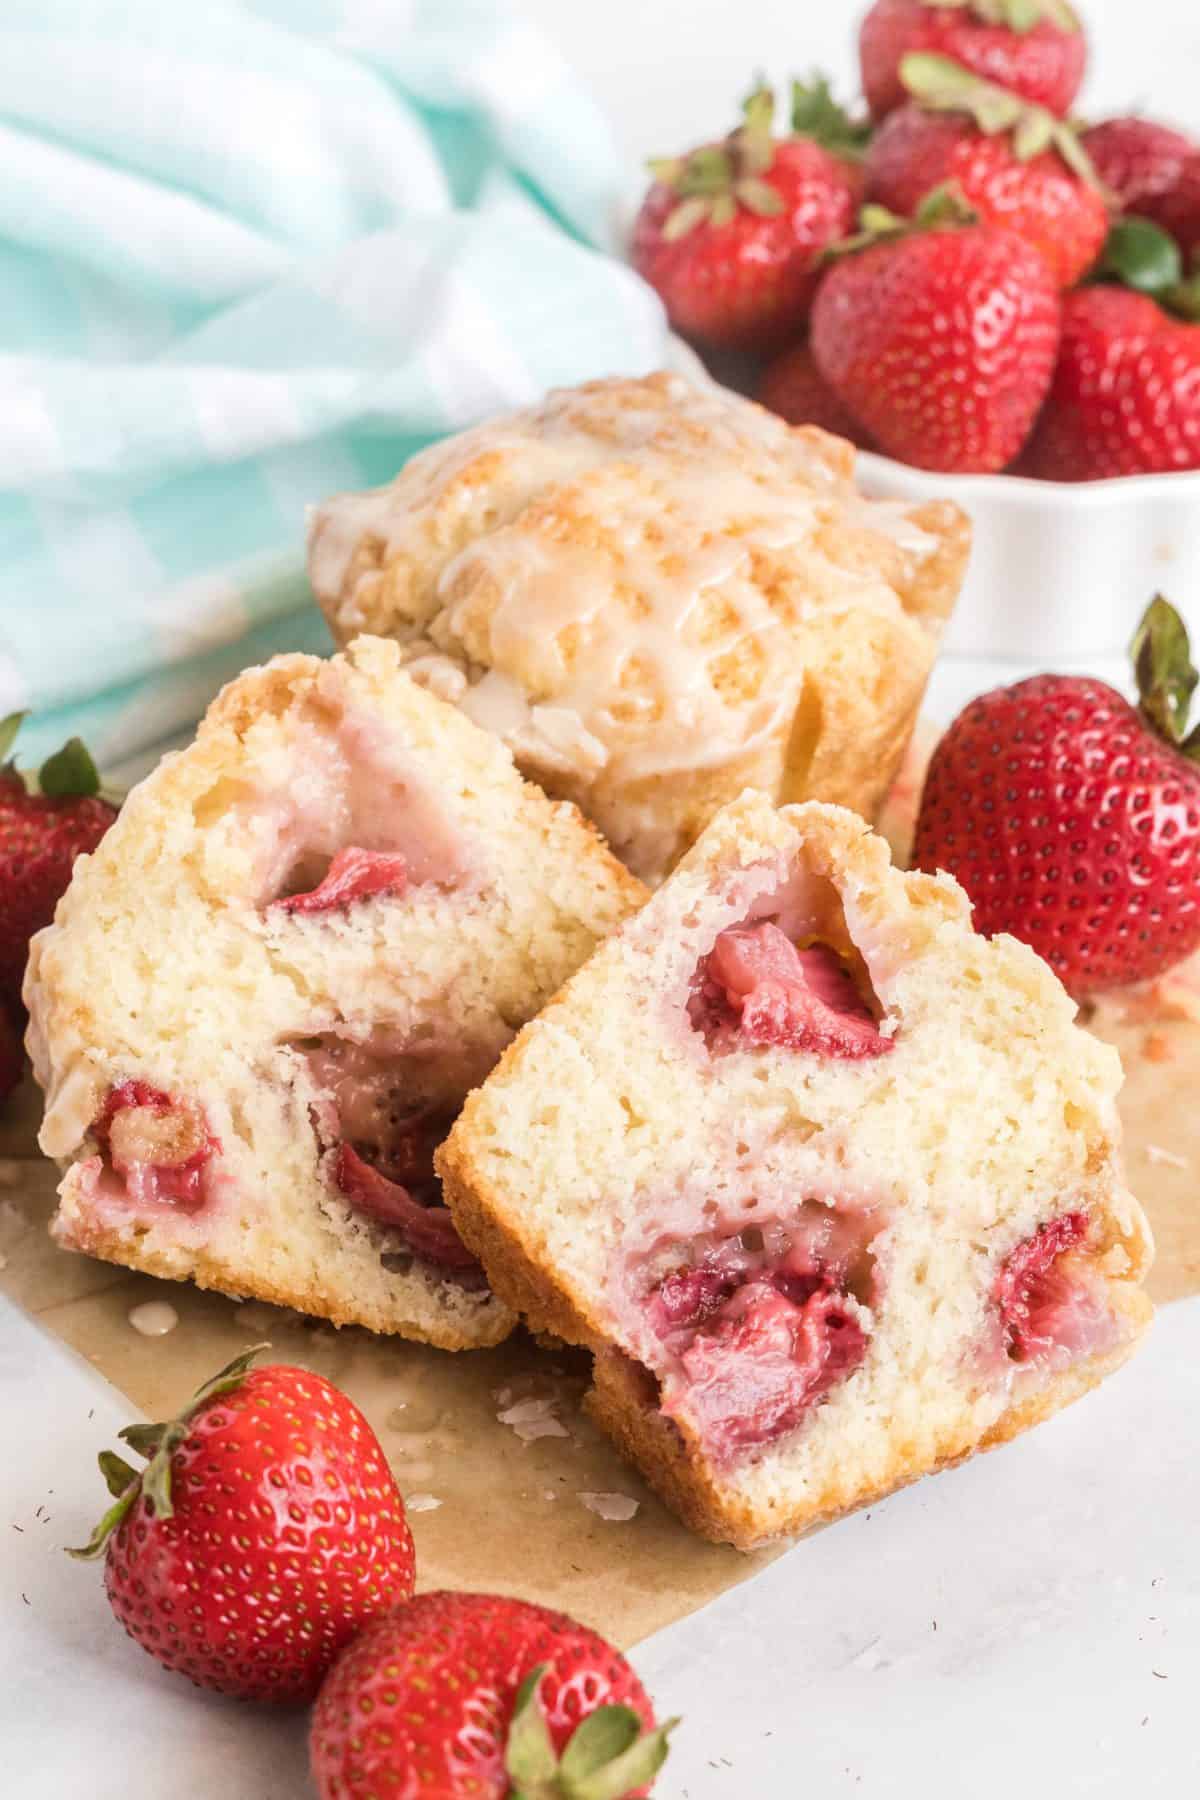 A muffin cut in half showing the fresh strawberries baked into the batter. 